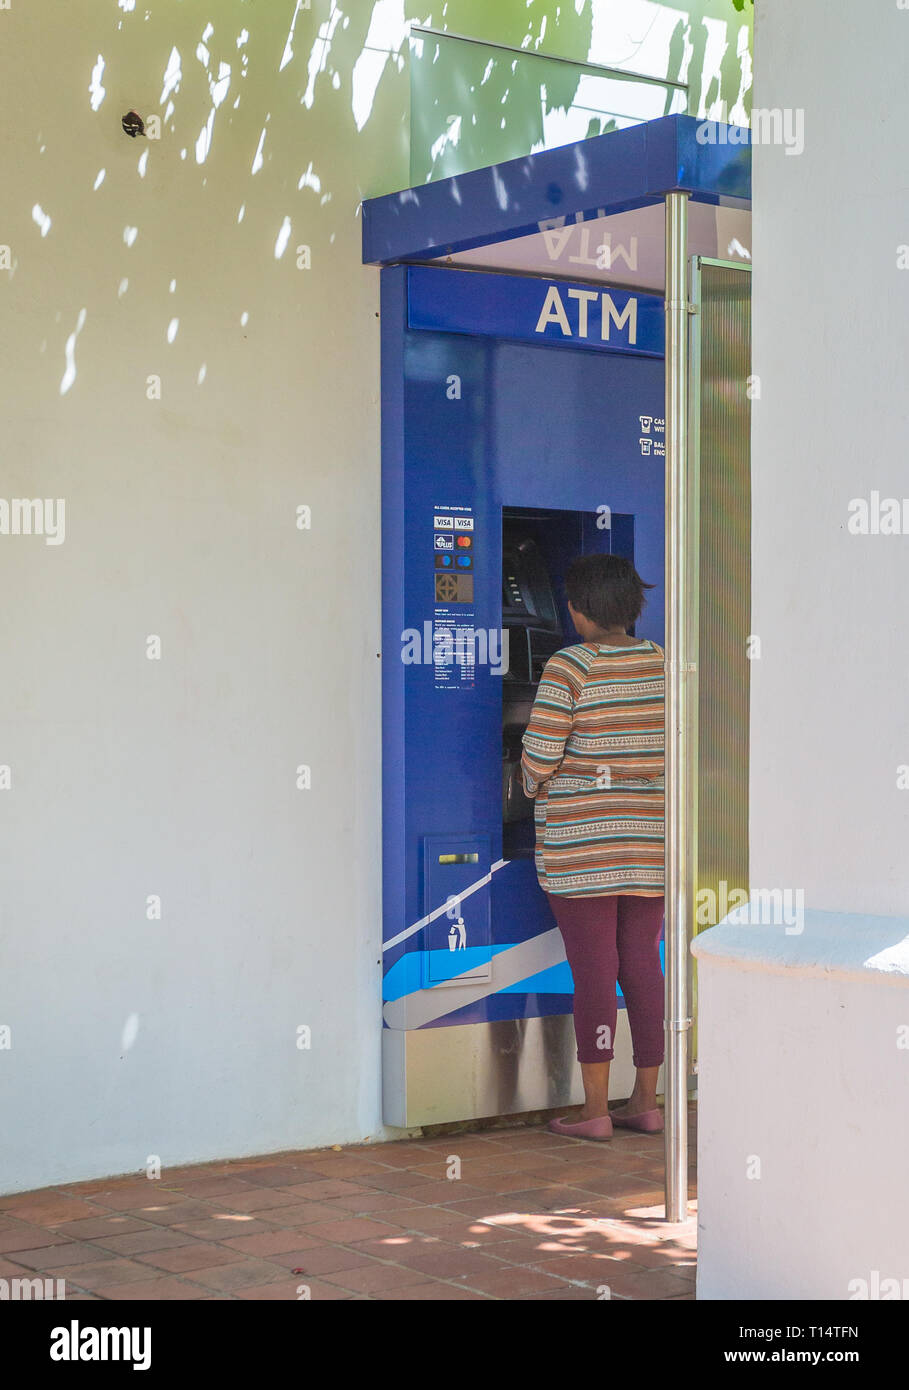 African lady or woman at an ATM machine in South Africa concept of technology or banking in Africa or African technology and lifestyle Stock Photo